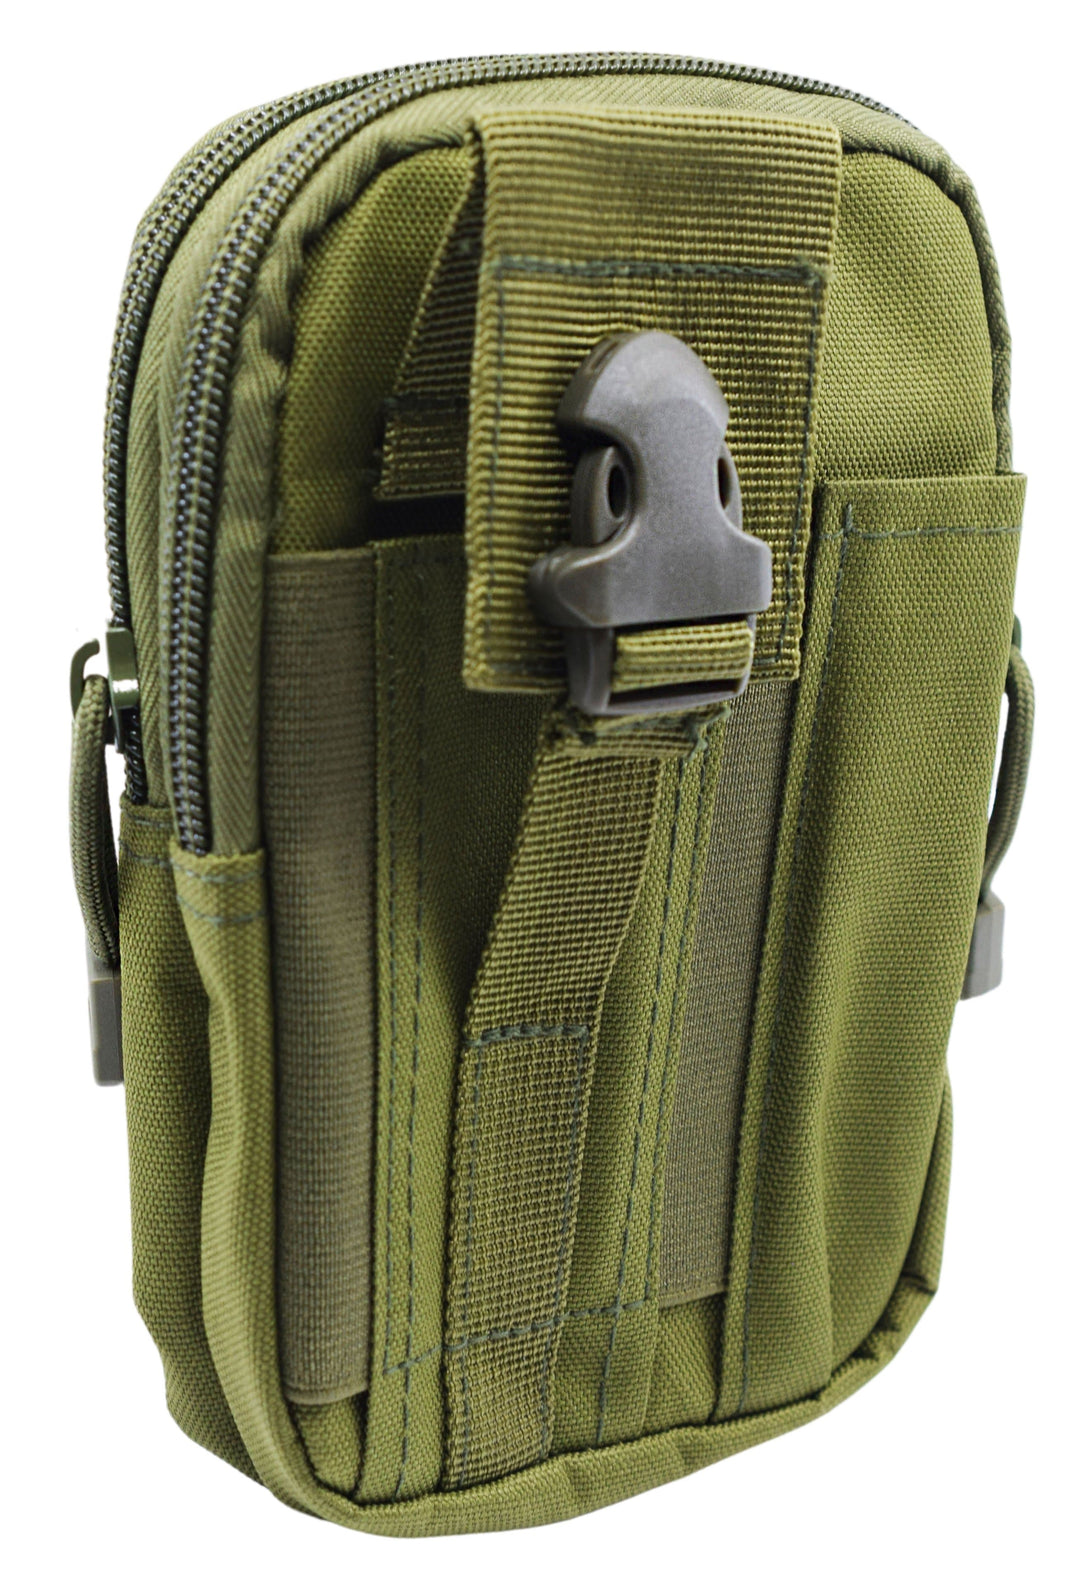 Teak Tuning Large Fingerboard Travel/Carry Bag - Army Green